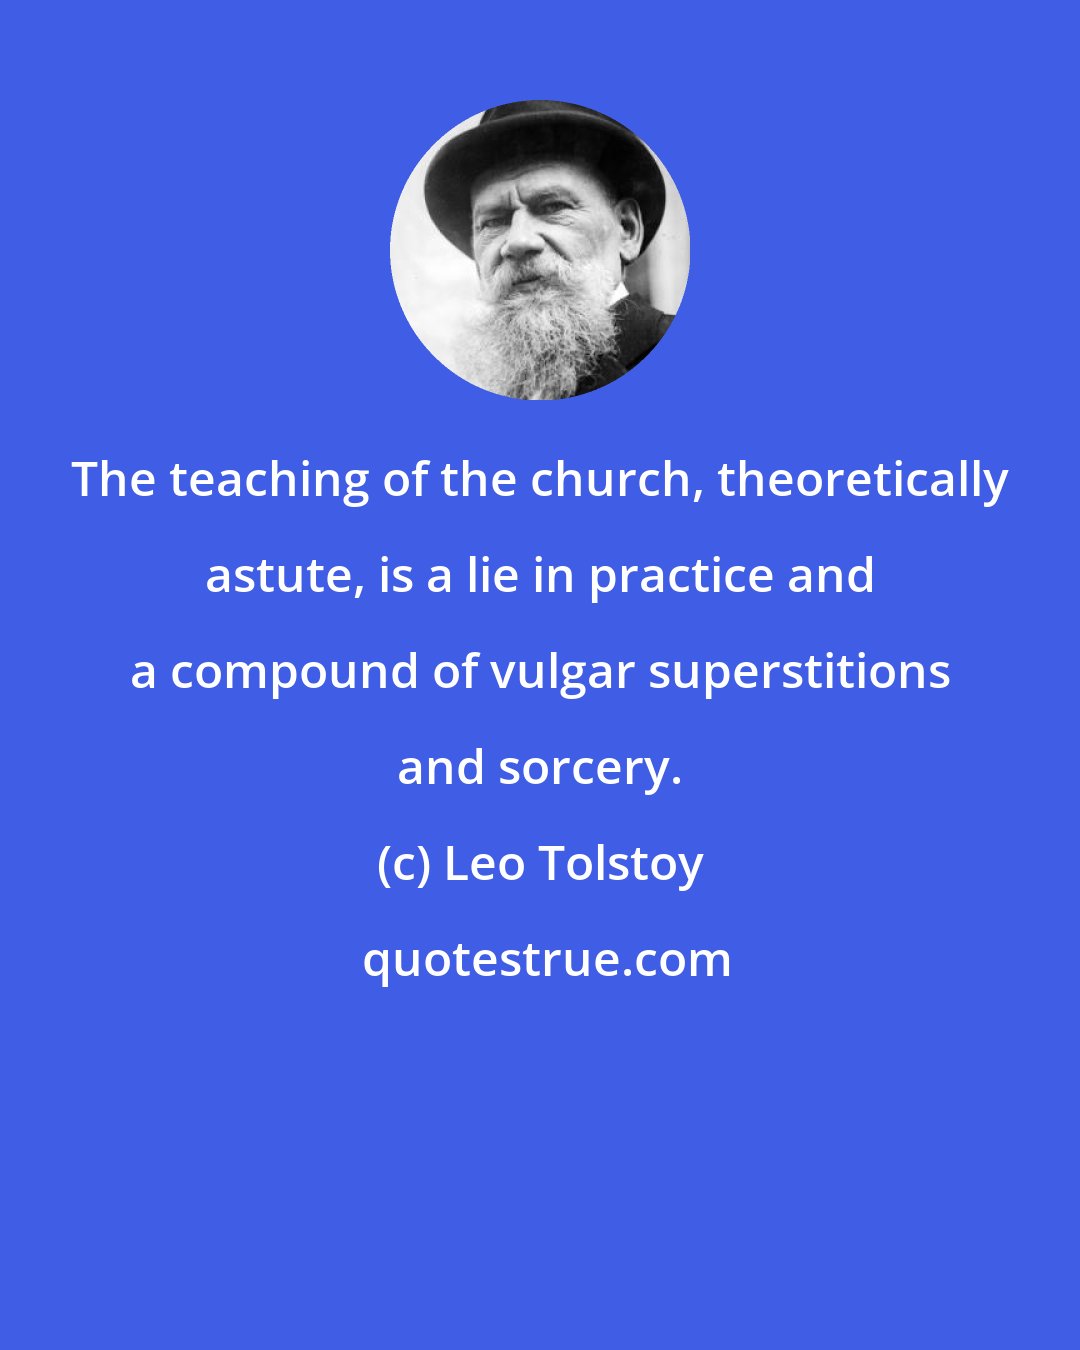 Leo Tolstoy: The teaching of the church, theoretically astute, is a lie in practice and a compound of vulgar superstitions and sorcery.